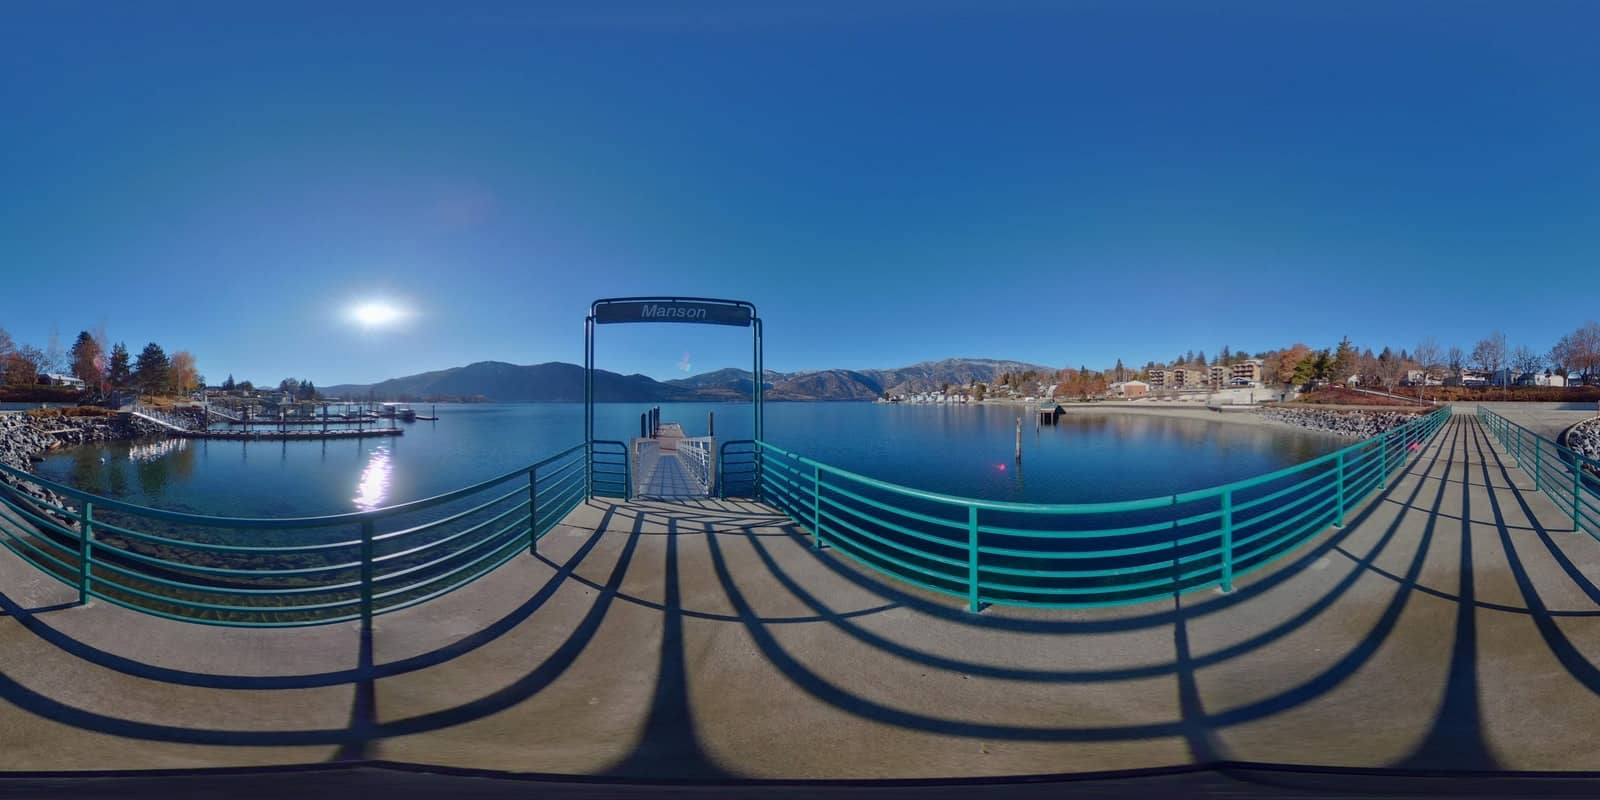 360 pano viewer online